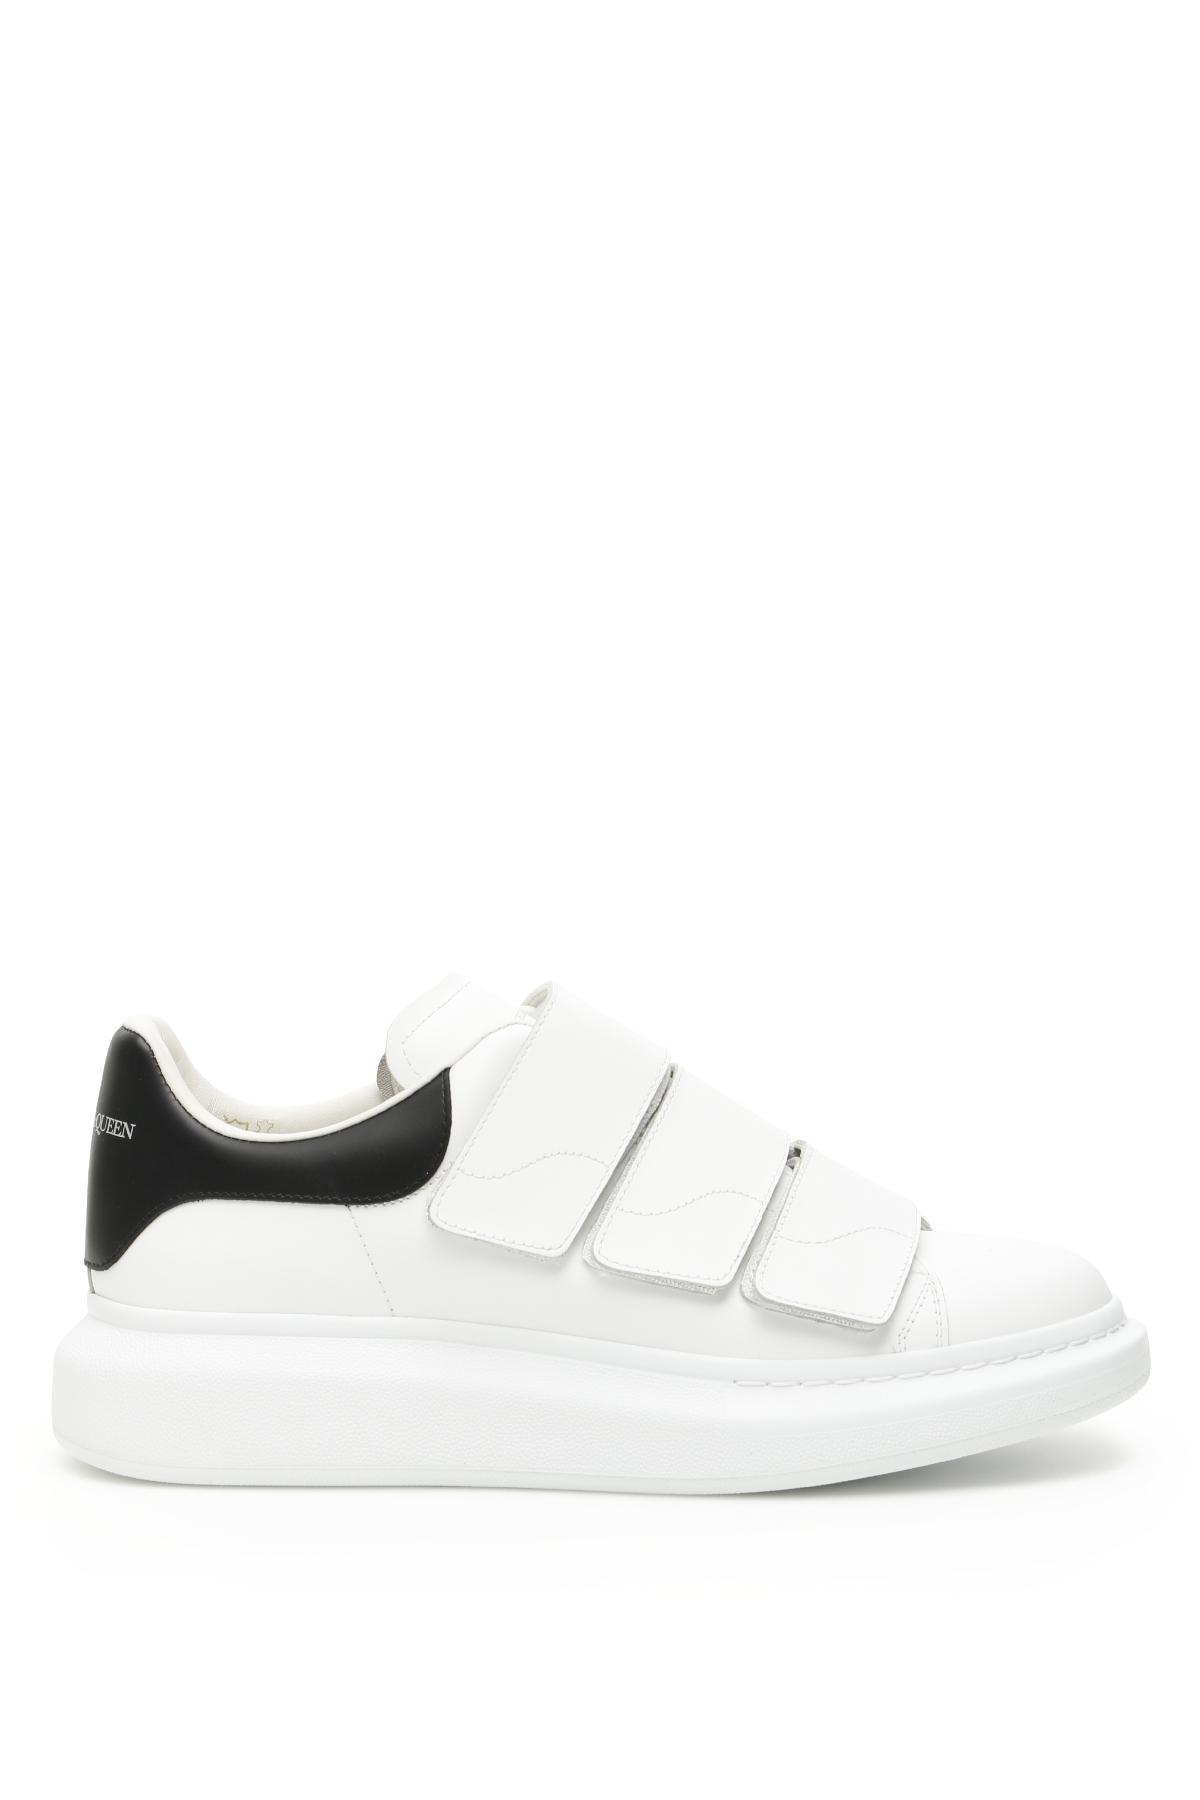 Alexander McQueen Leather Oversized 3 Strap Sneakers in White 